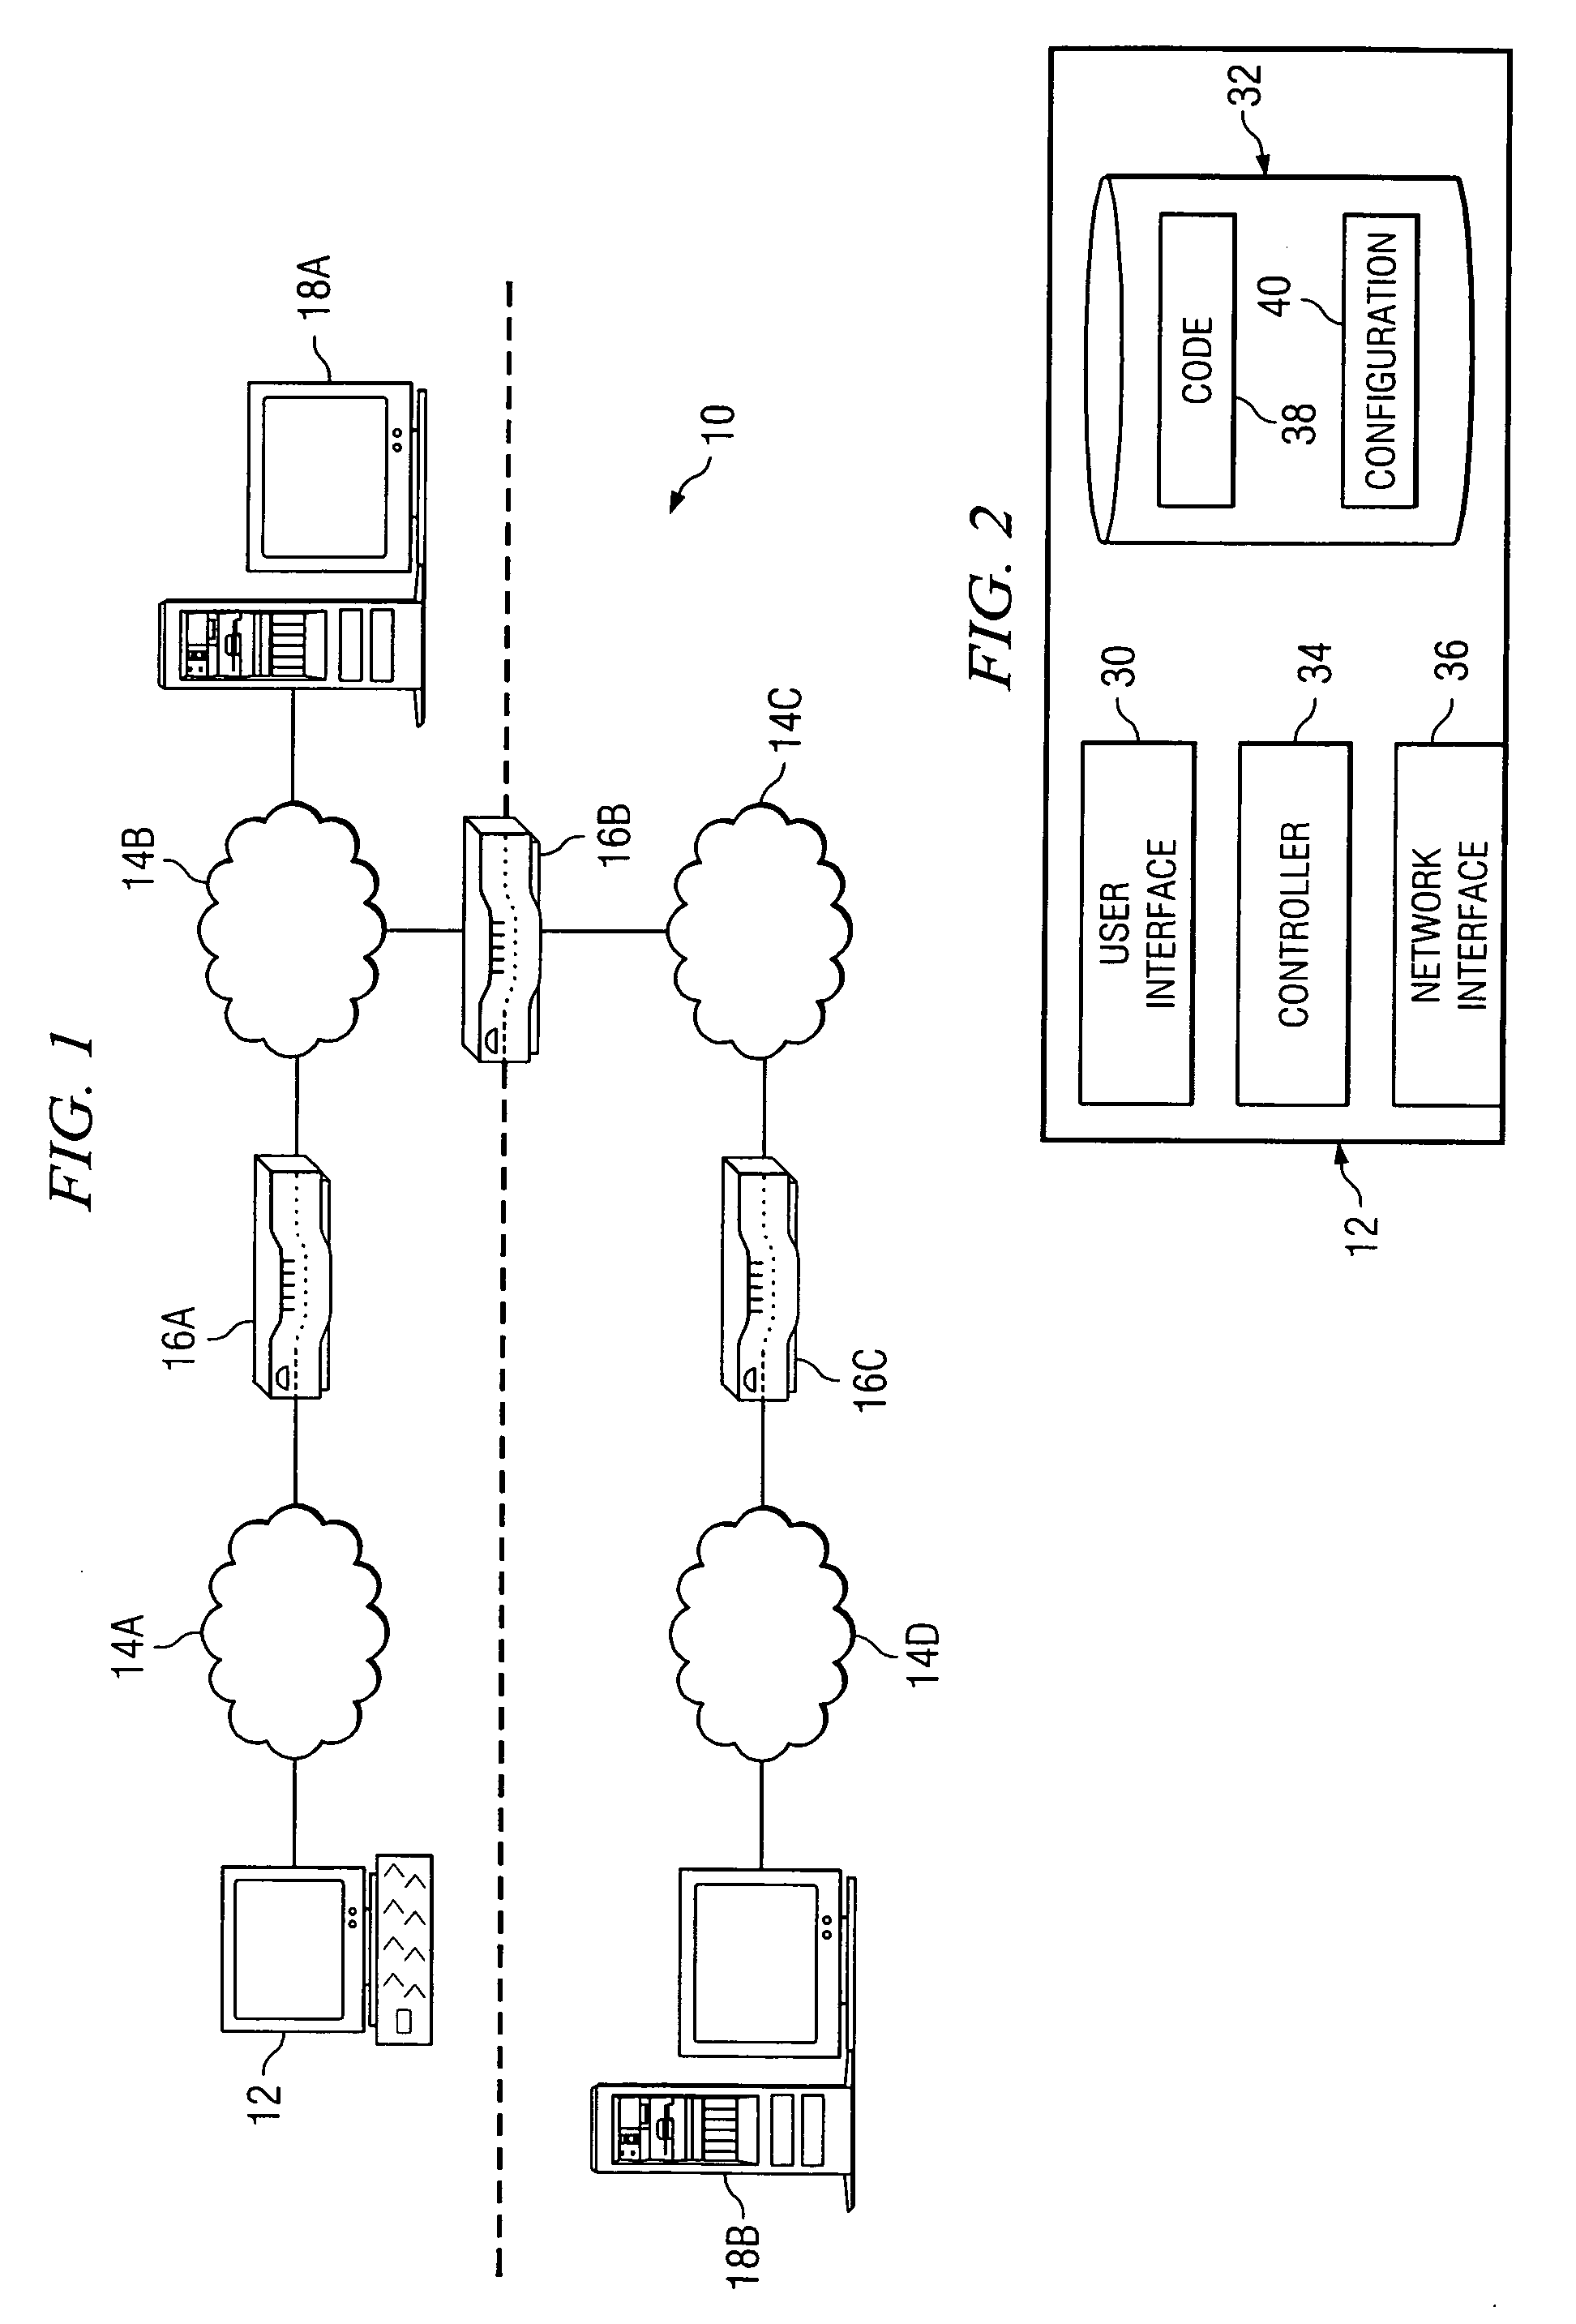 Method and system for detecting a network anomaly in a network